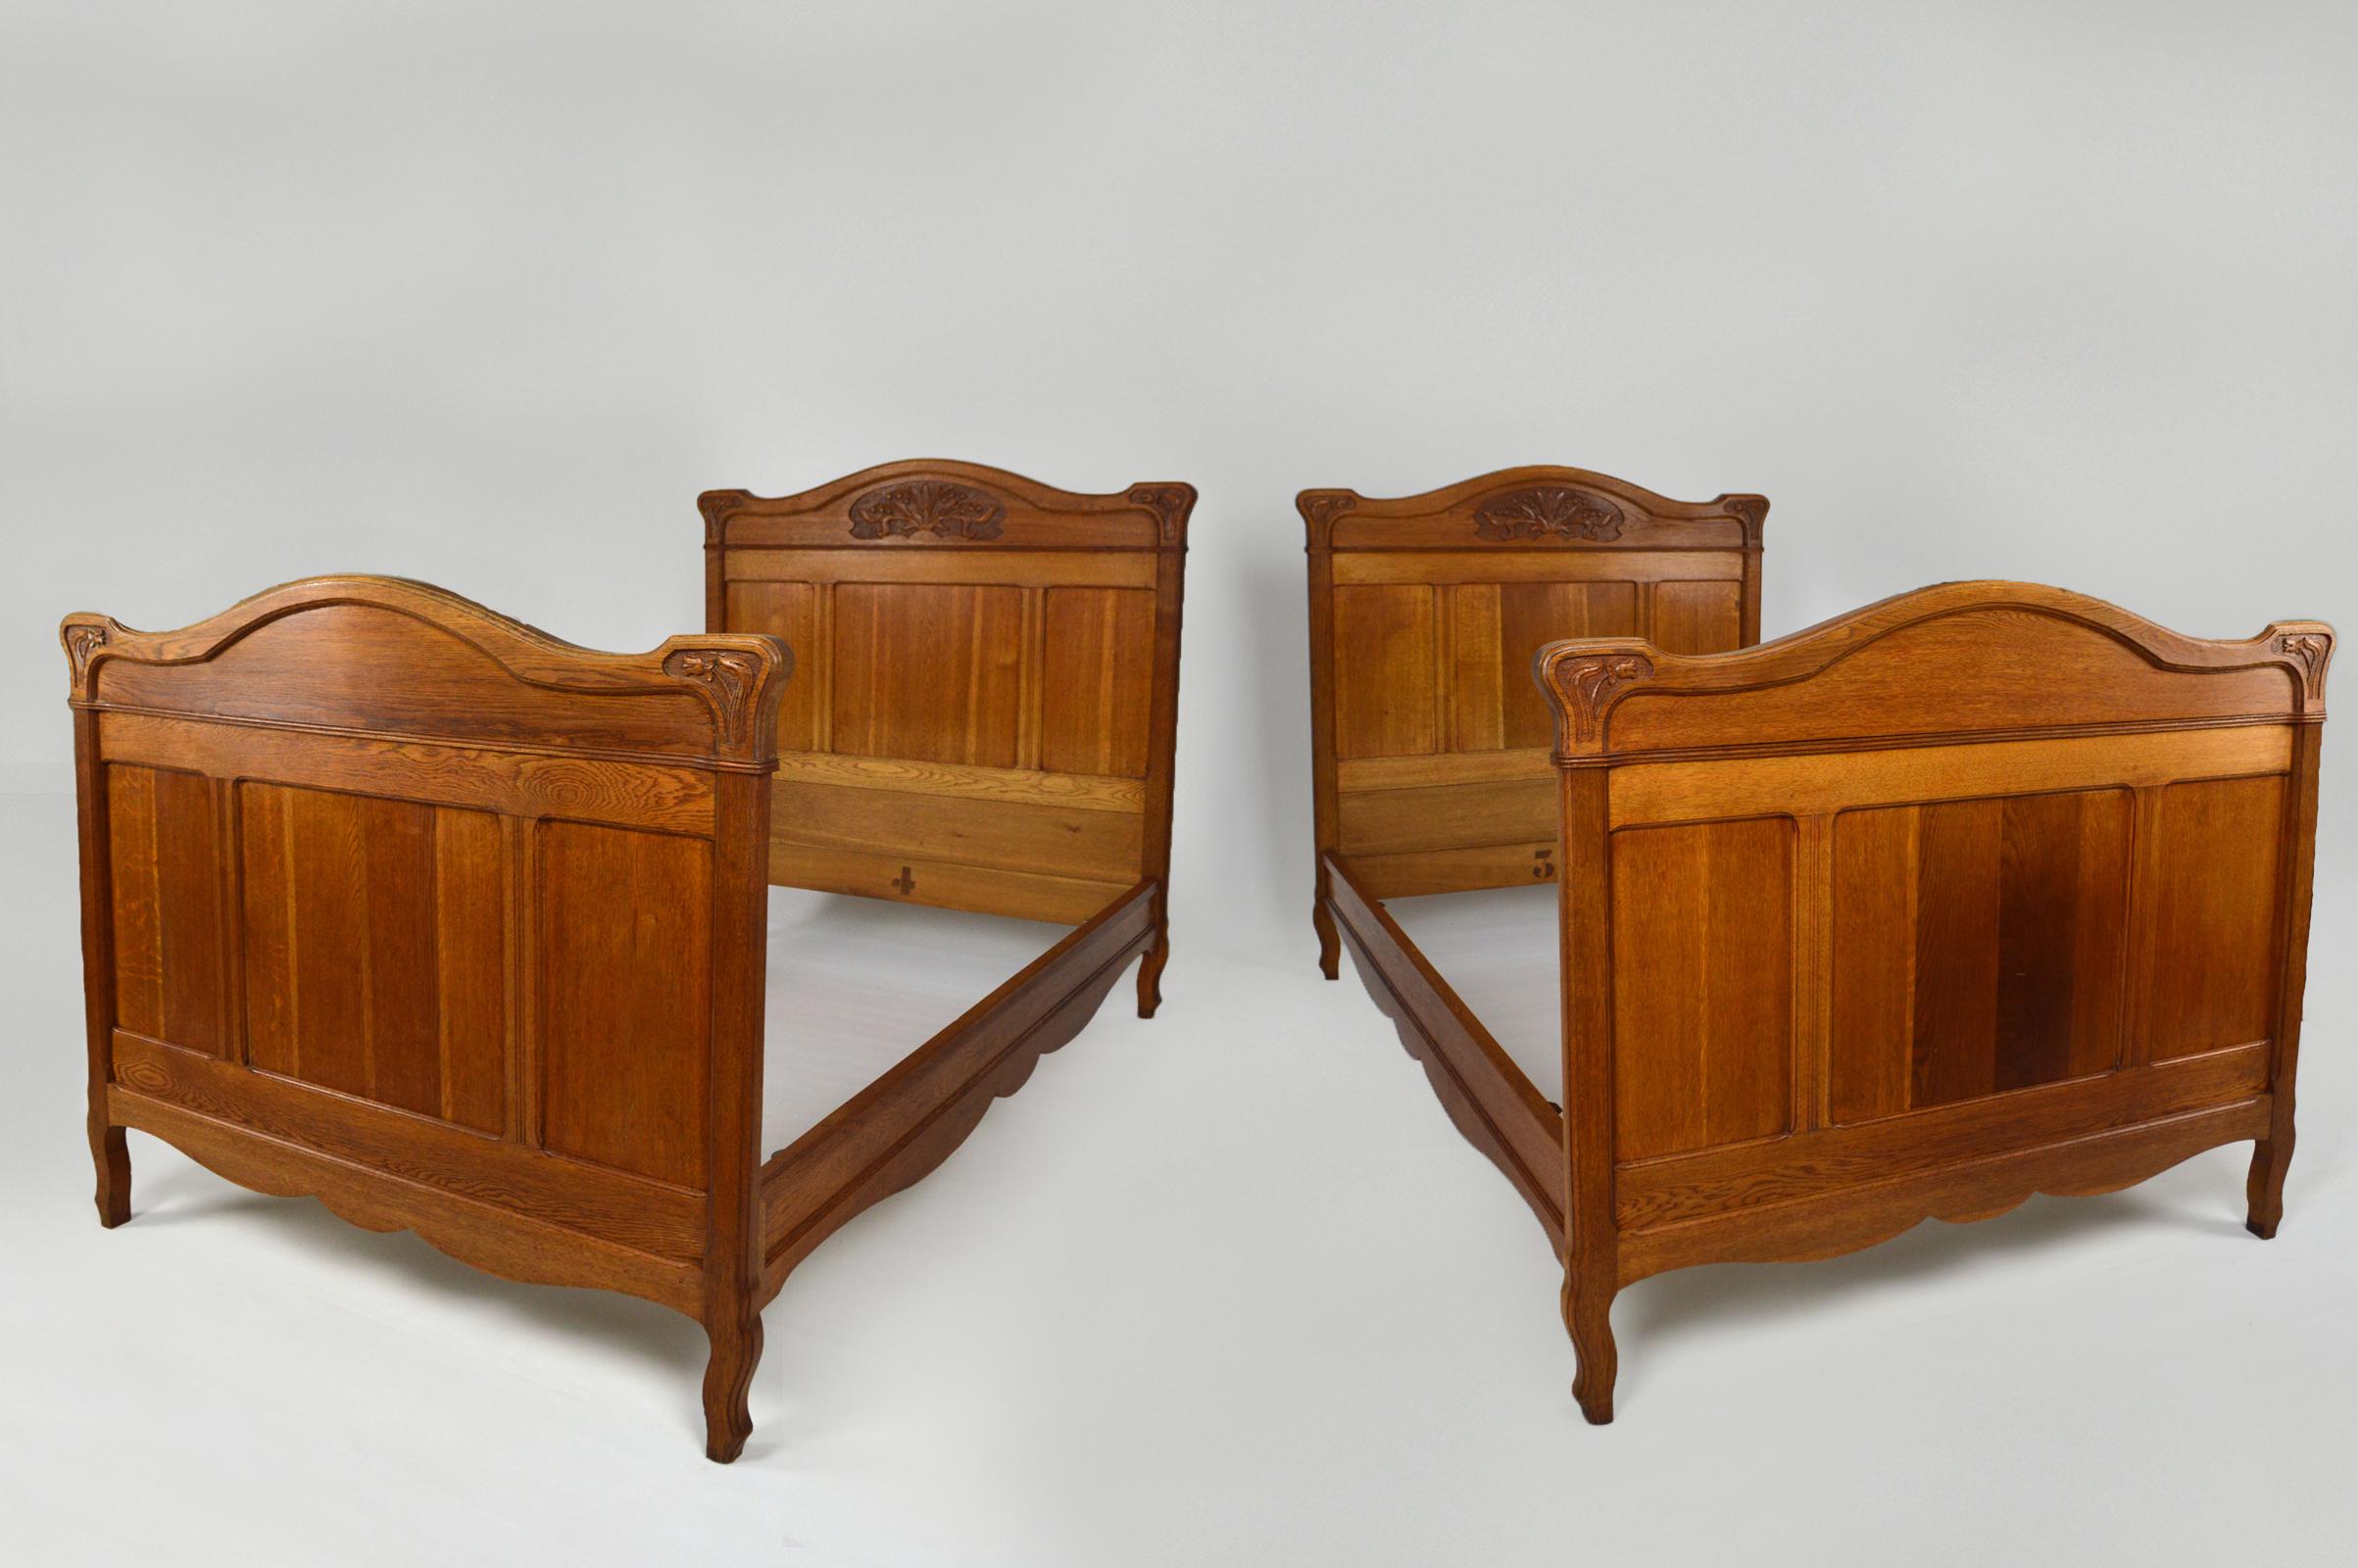 Elegant pair of oak twin beds. The pediments and corners of the headboards are beautifully carved in a floral theme.

Art Nouveau, France, around 1910.

In very good condition, wood treated against xylophages.

Dimensions:
height 123 cm upper